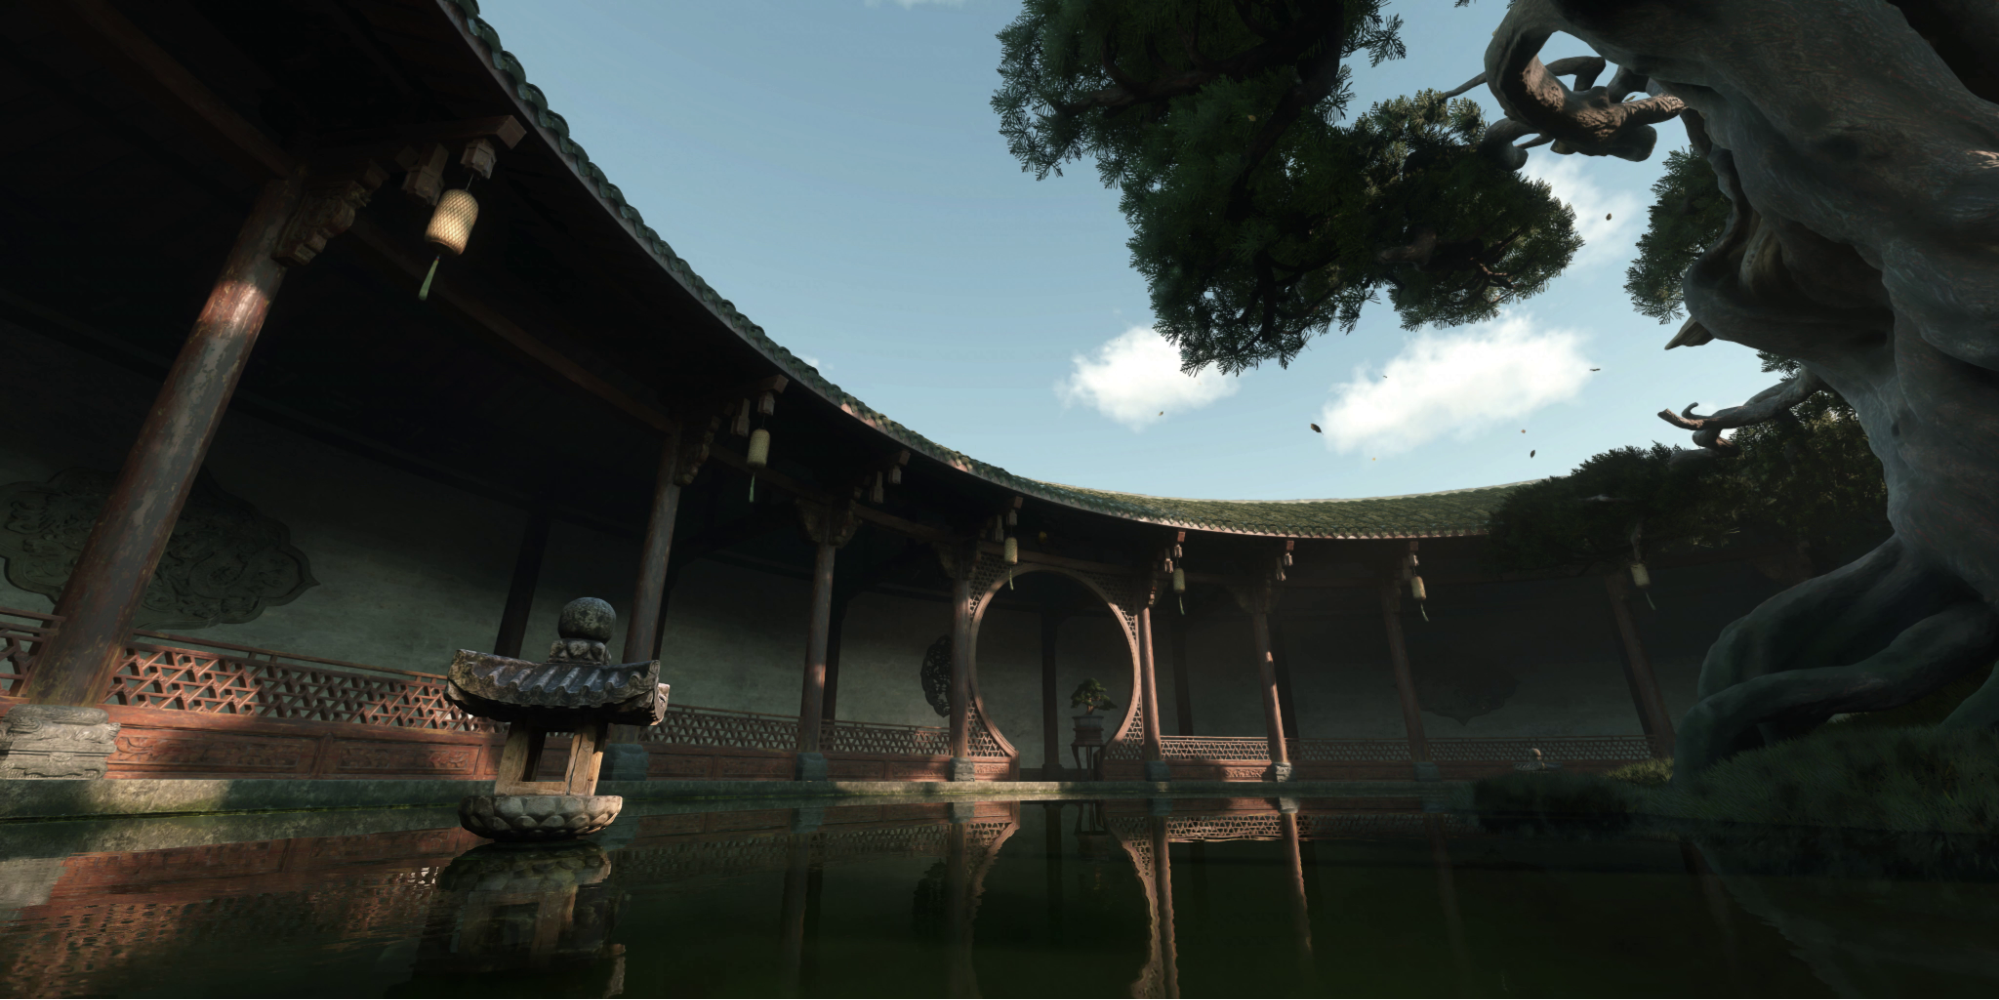 Screenshot showing RTX path tracing in a temple scene from the NetEase game, Justice.